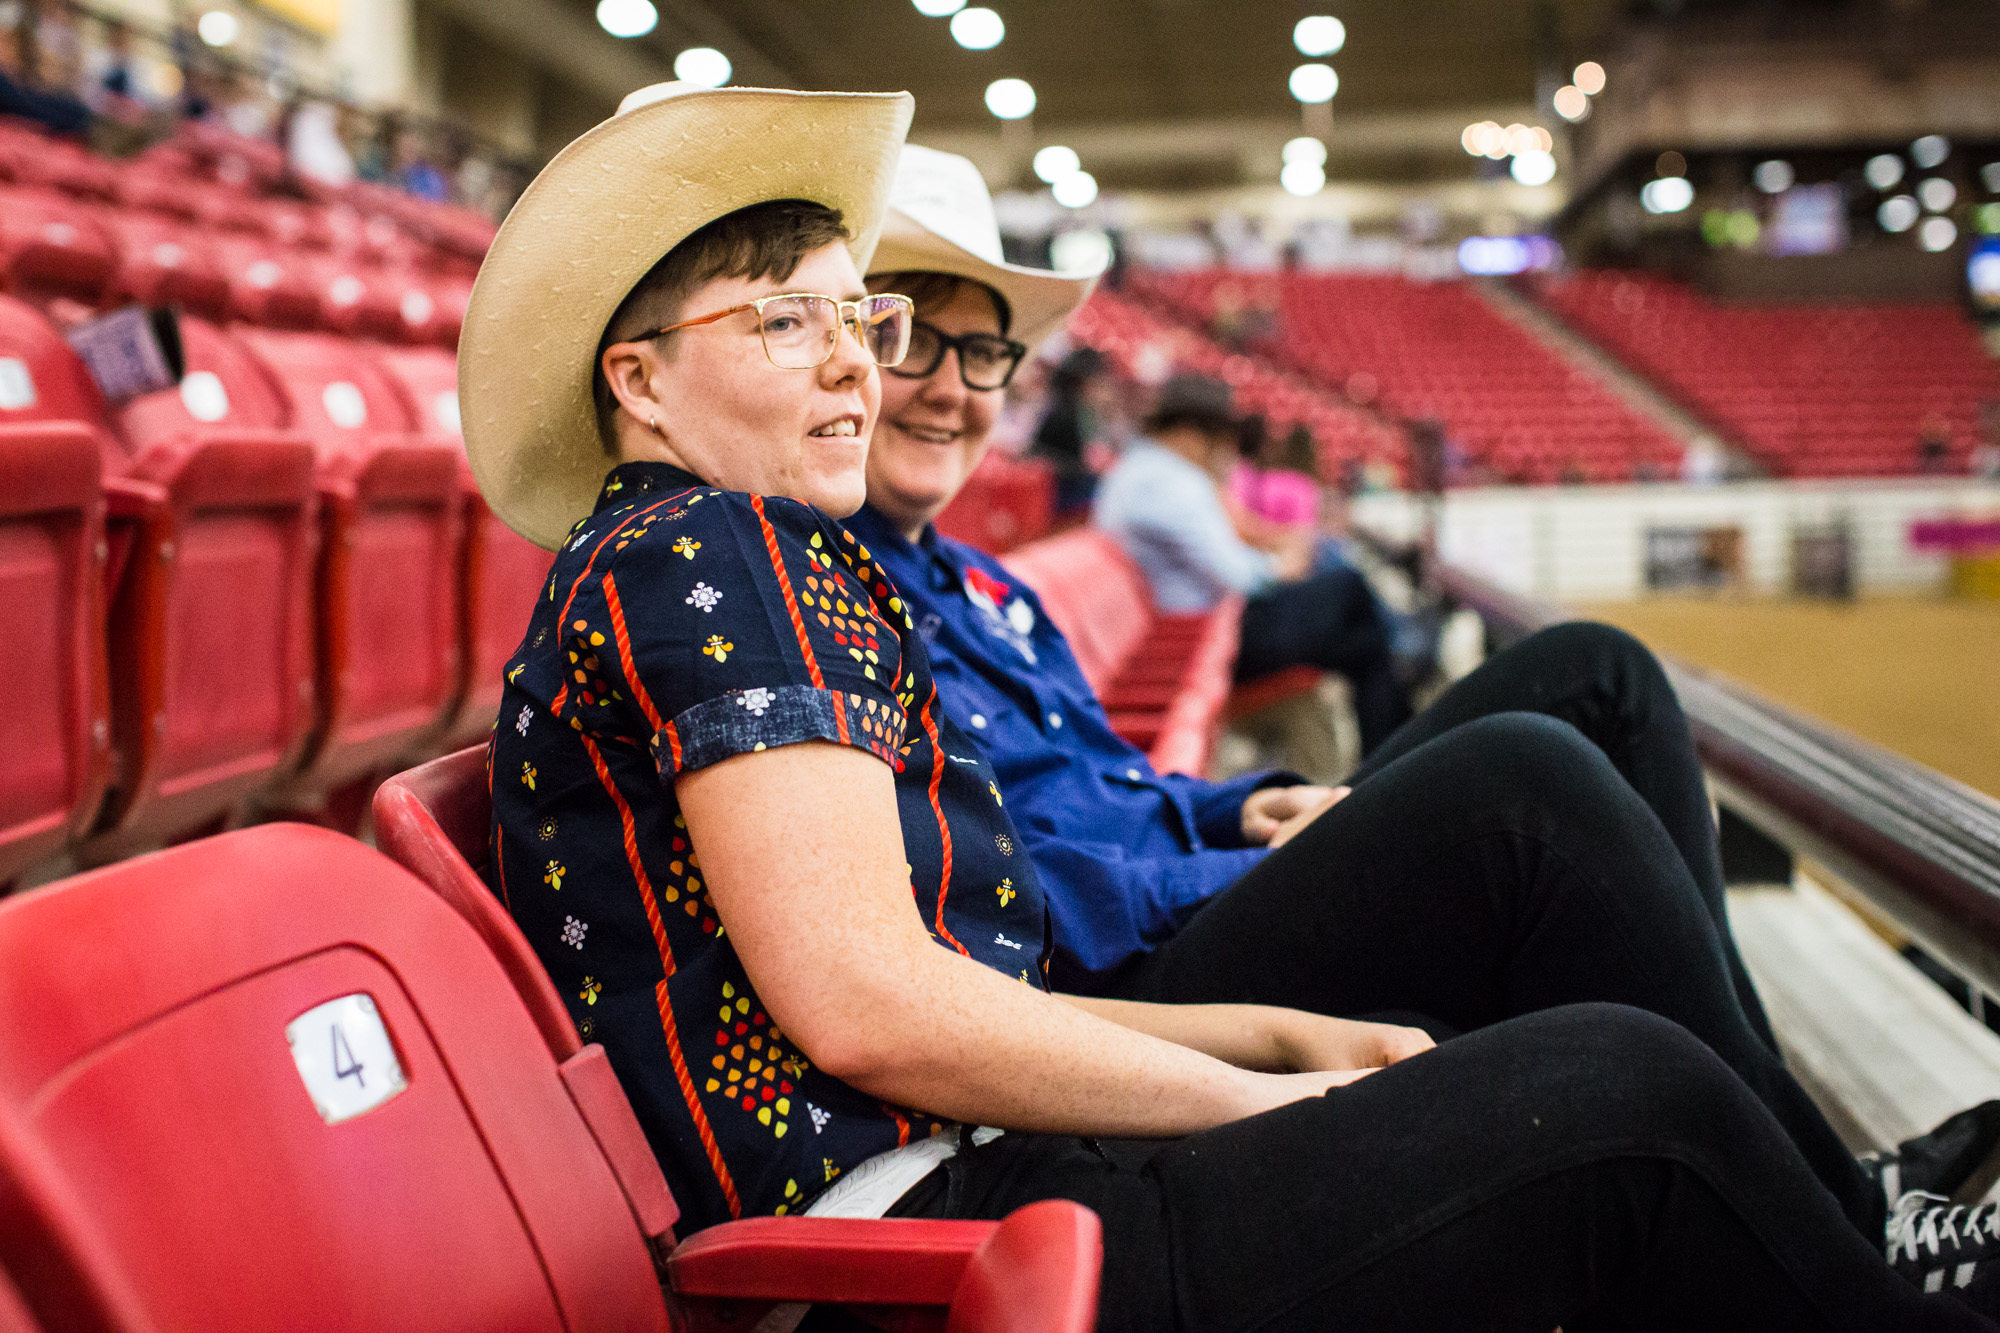  Amanda Kirkhuff and Clyde Petersen watch the Pole Bending event at the World Gay Rodeo Finals in Las Vegas, NV. Amanda grew up going to rodeos, but enjoys the open environment of gay rodeos. "You always see gay people at rodeos, but it's just unspok